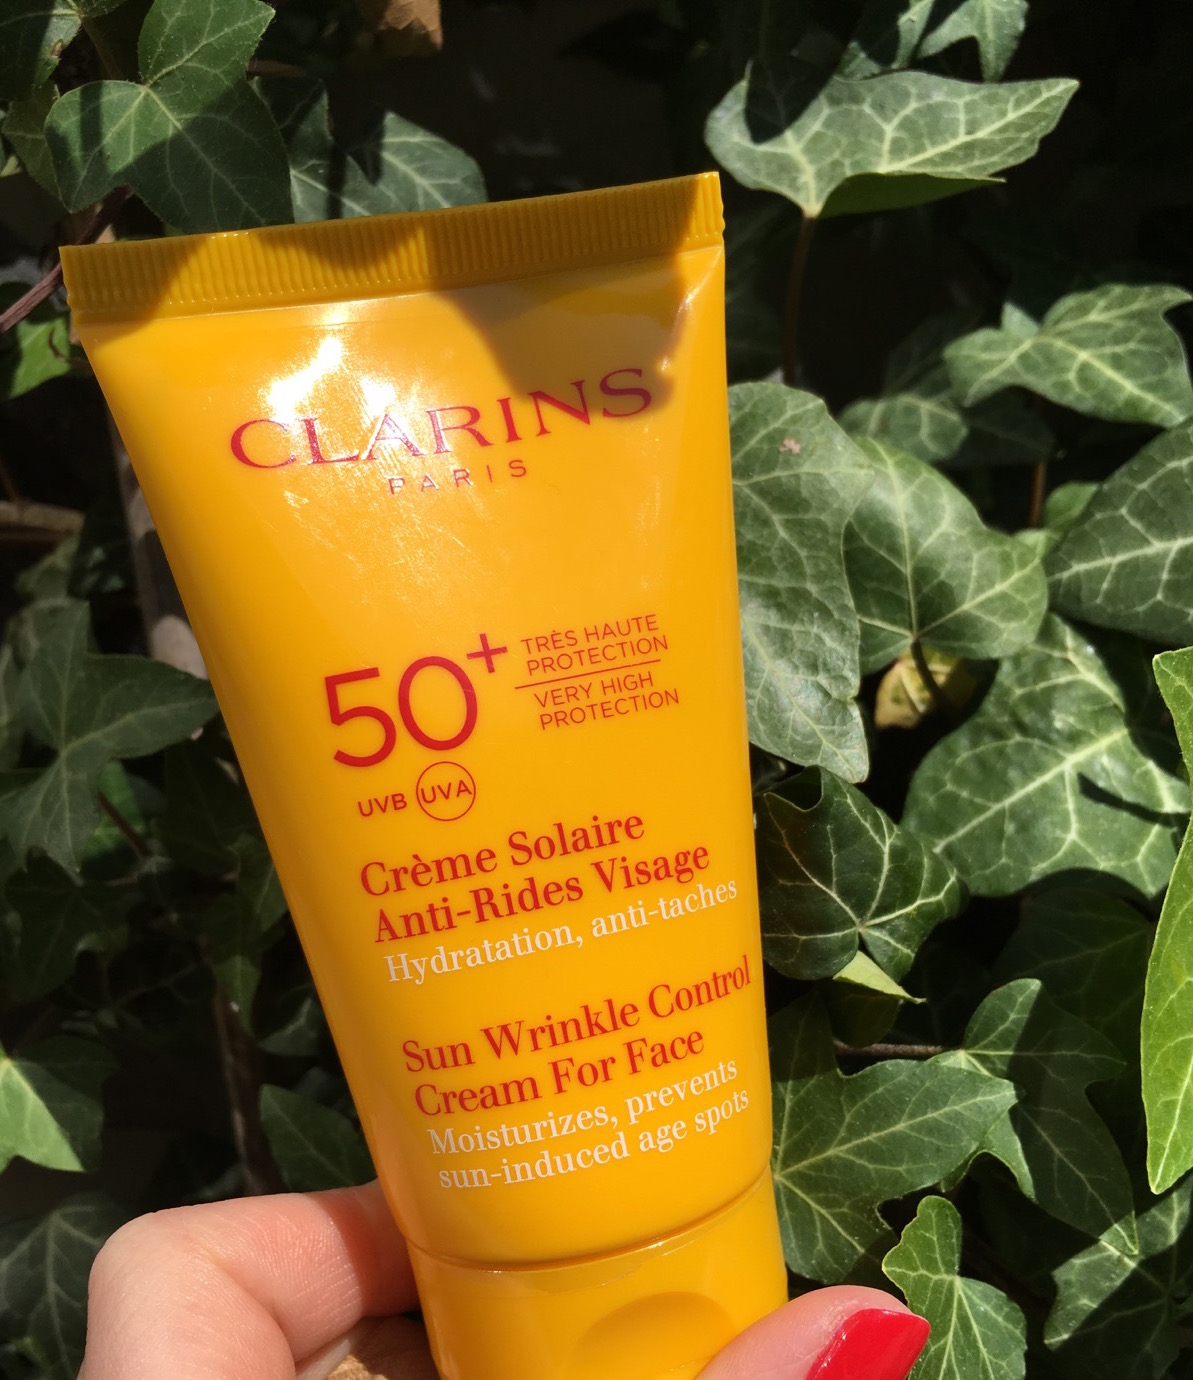 clarins sun wrinkle control cream for face